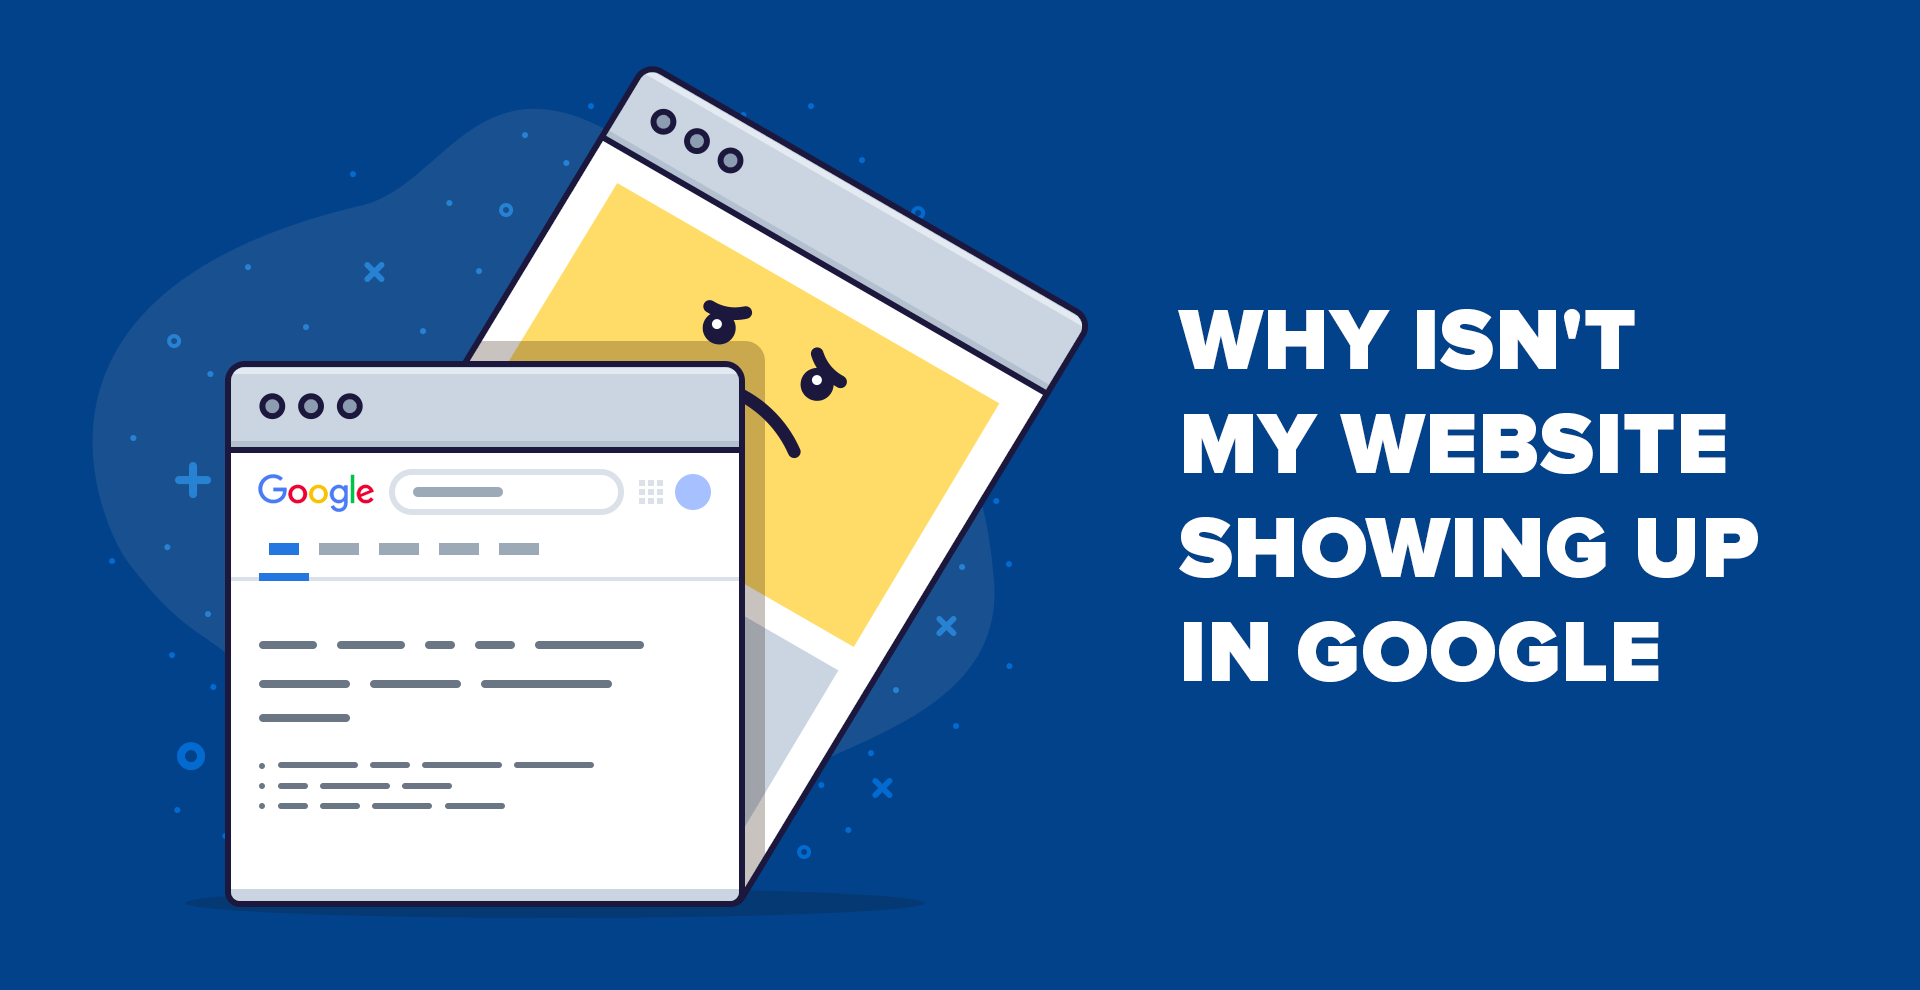 How do I get my site to show up on Google?